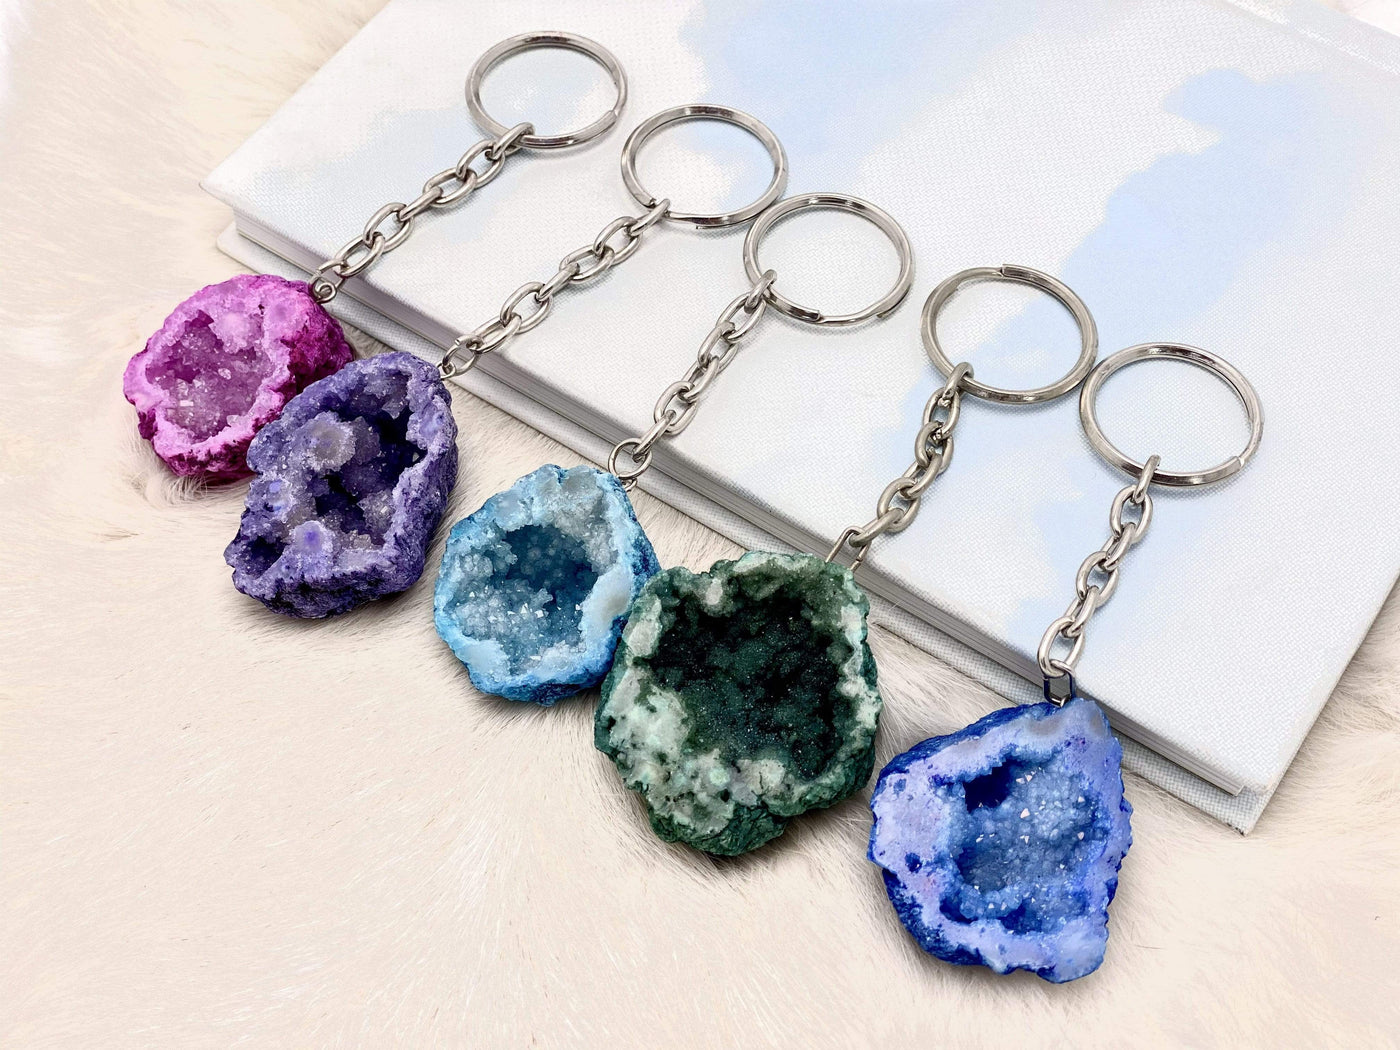 different colored half occo geode silver toned keychain shown against a white background showing the shiny crystals inside